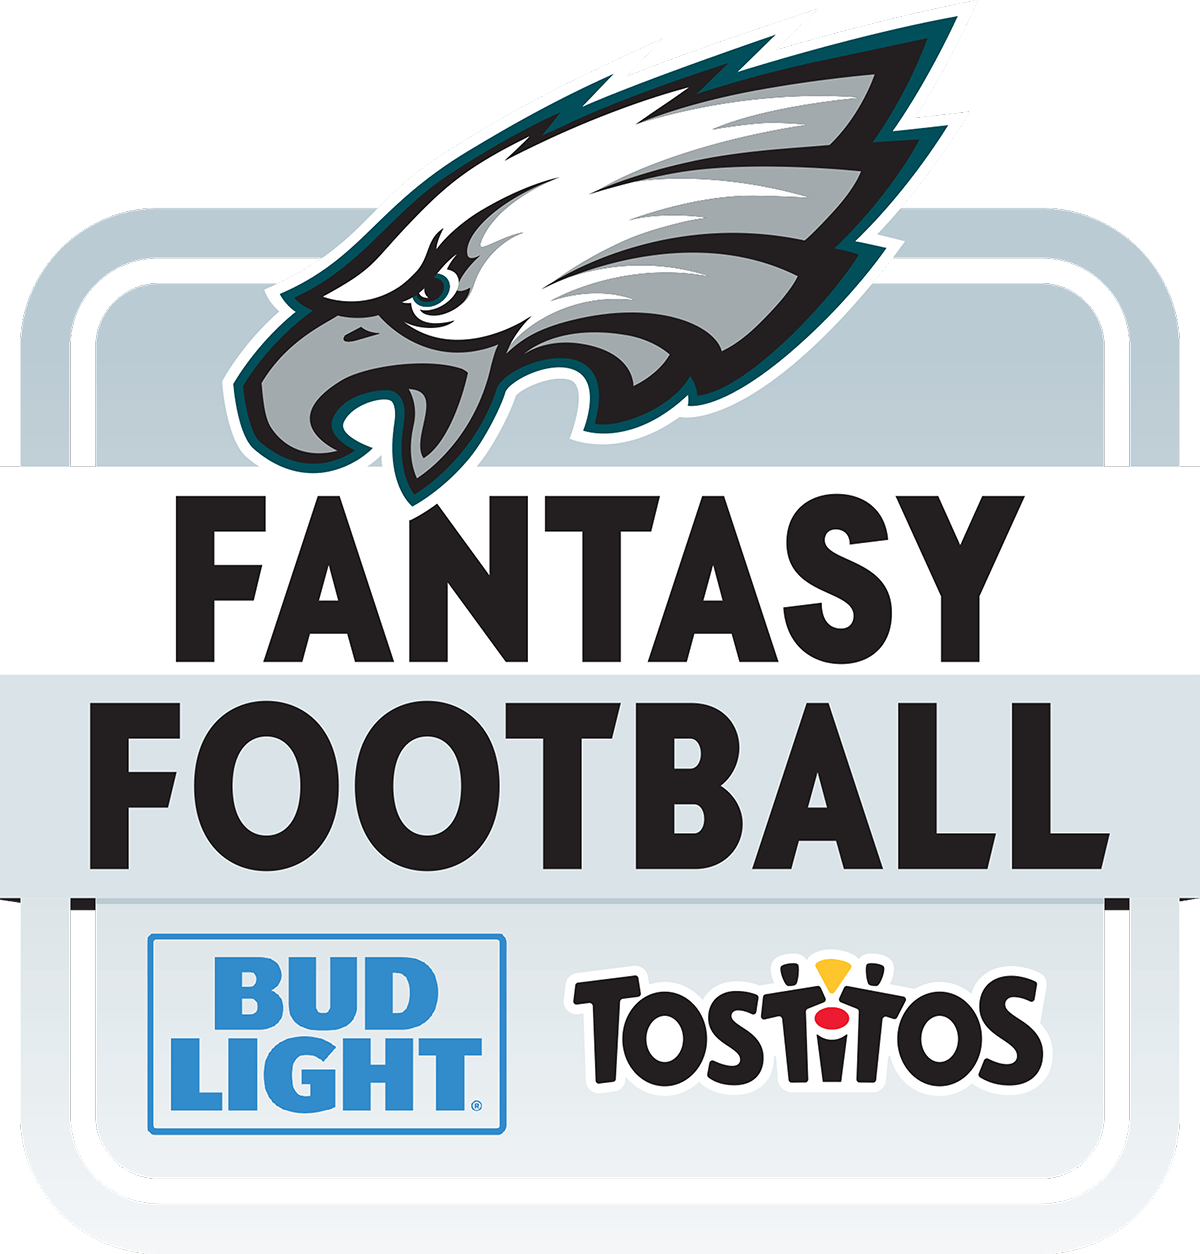 Eagles Fantasy Football Draft Party presented by Bud Light and Tostios